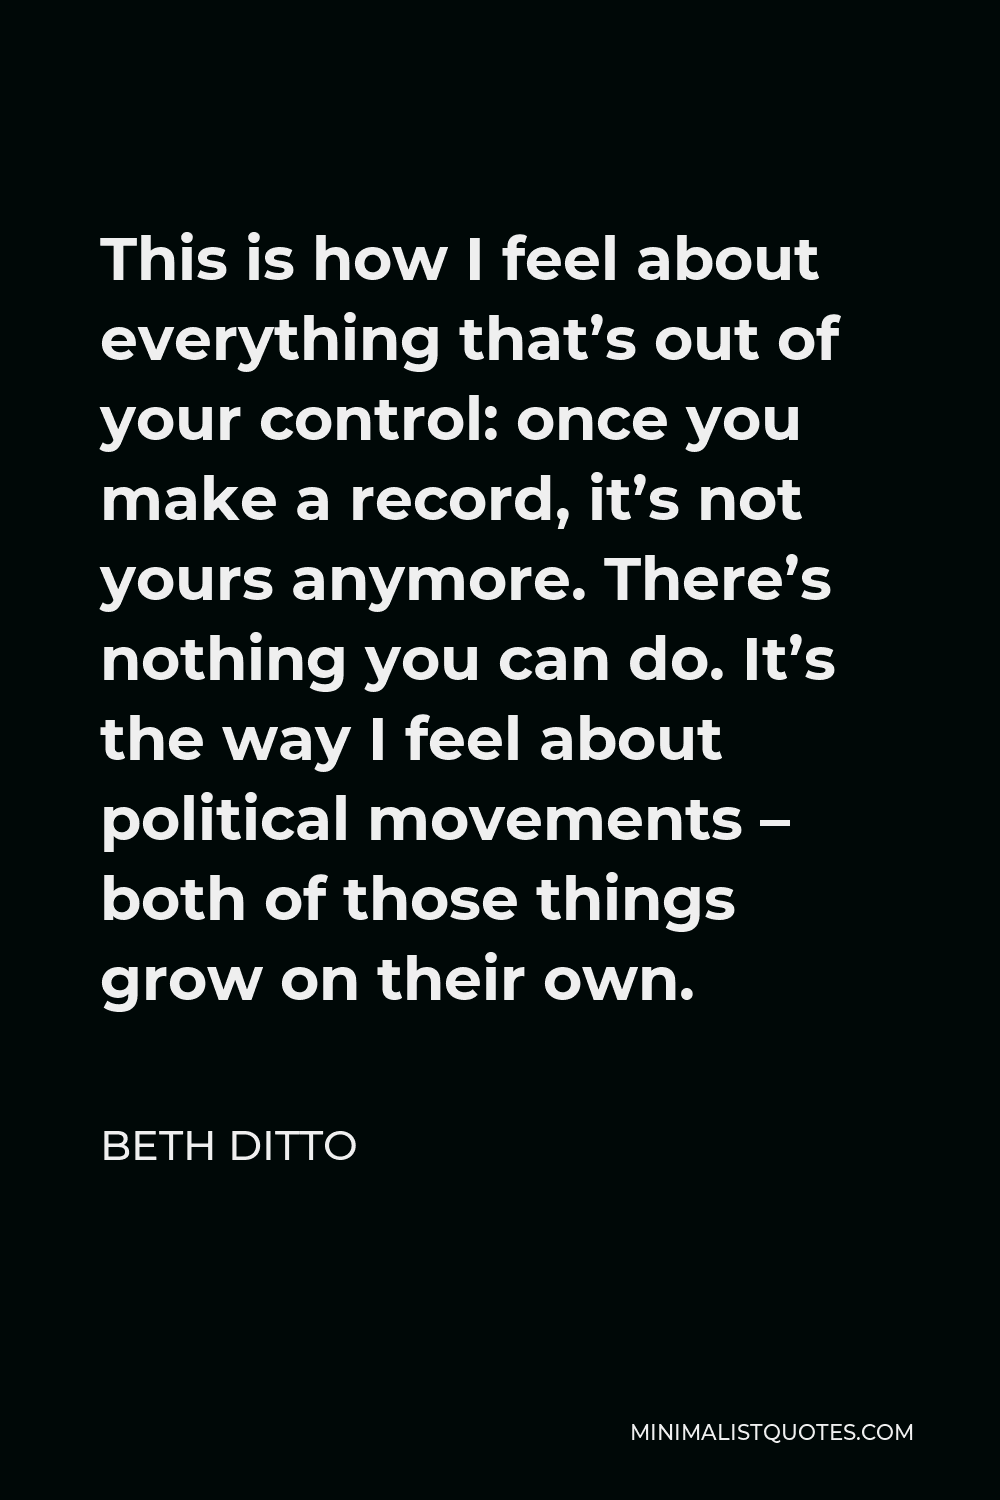 Beth Ditto Quote - This is how I feel about everything that’s out of your control: once you make a record, it’s not yours anymore. There’s nothing you can do. It’s the way I feel about political movements – both of those things grow on their own.